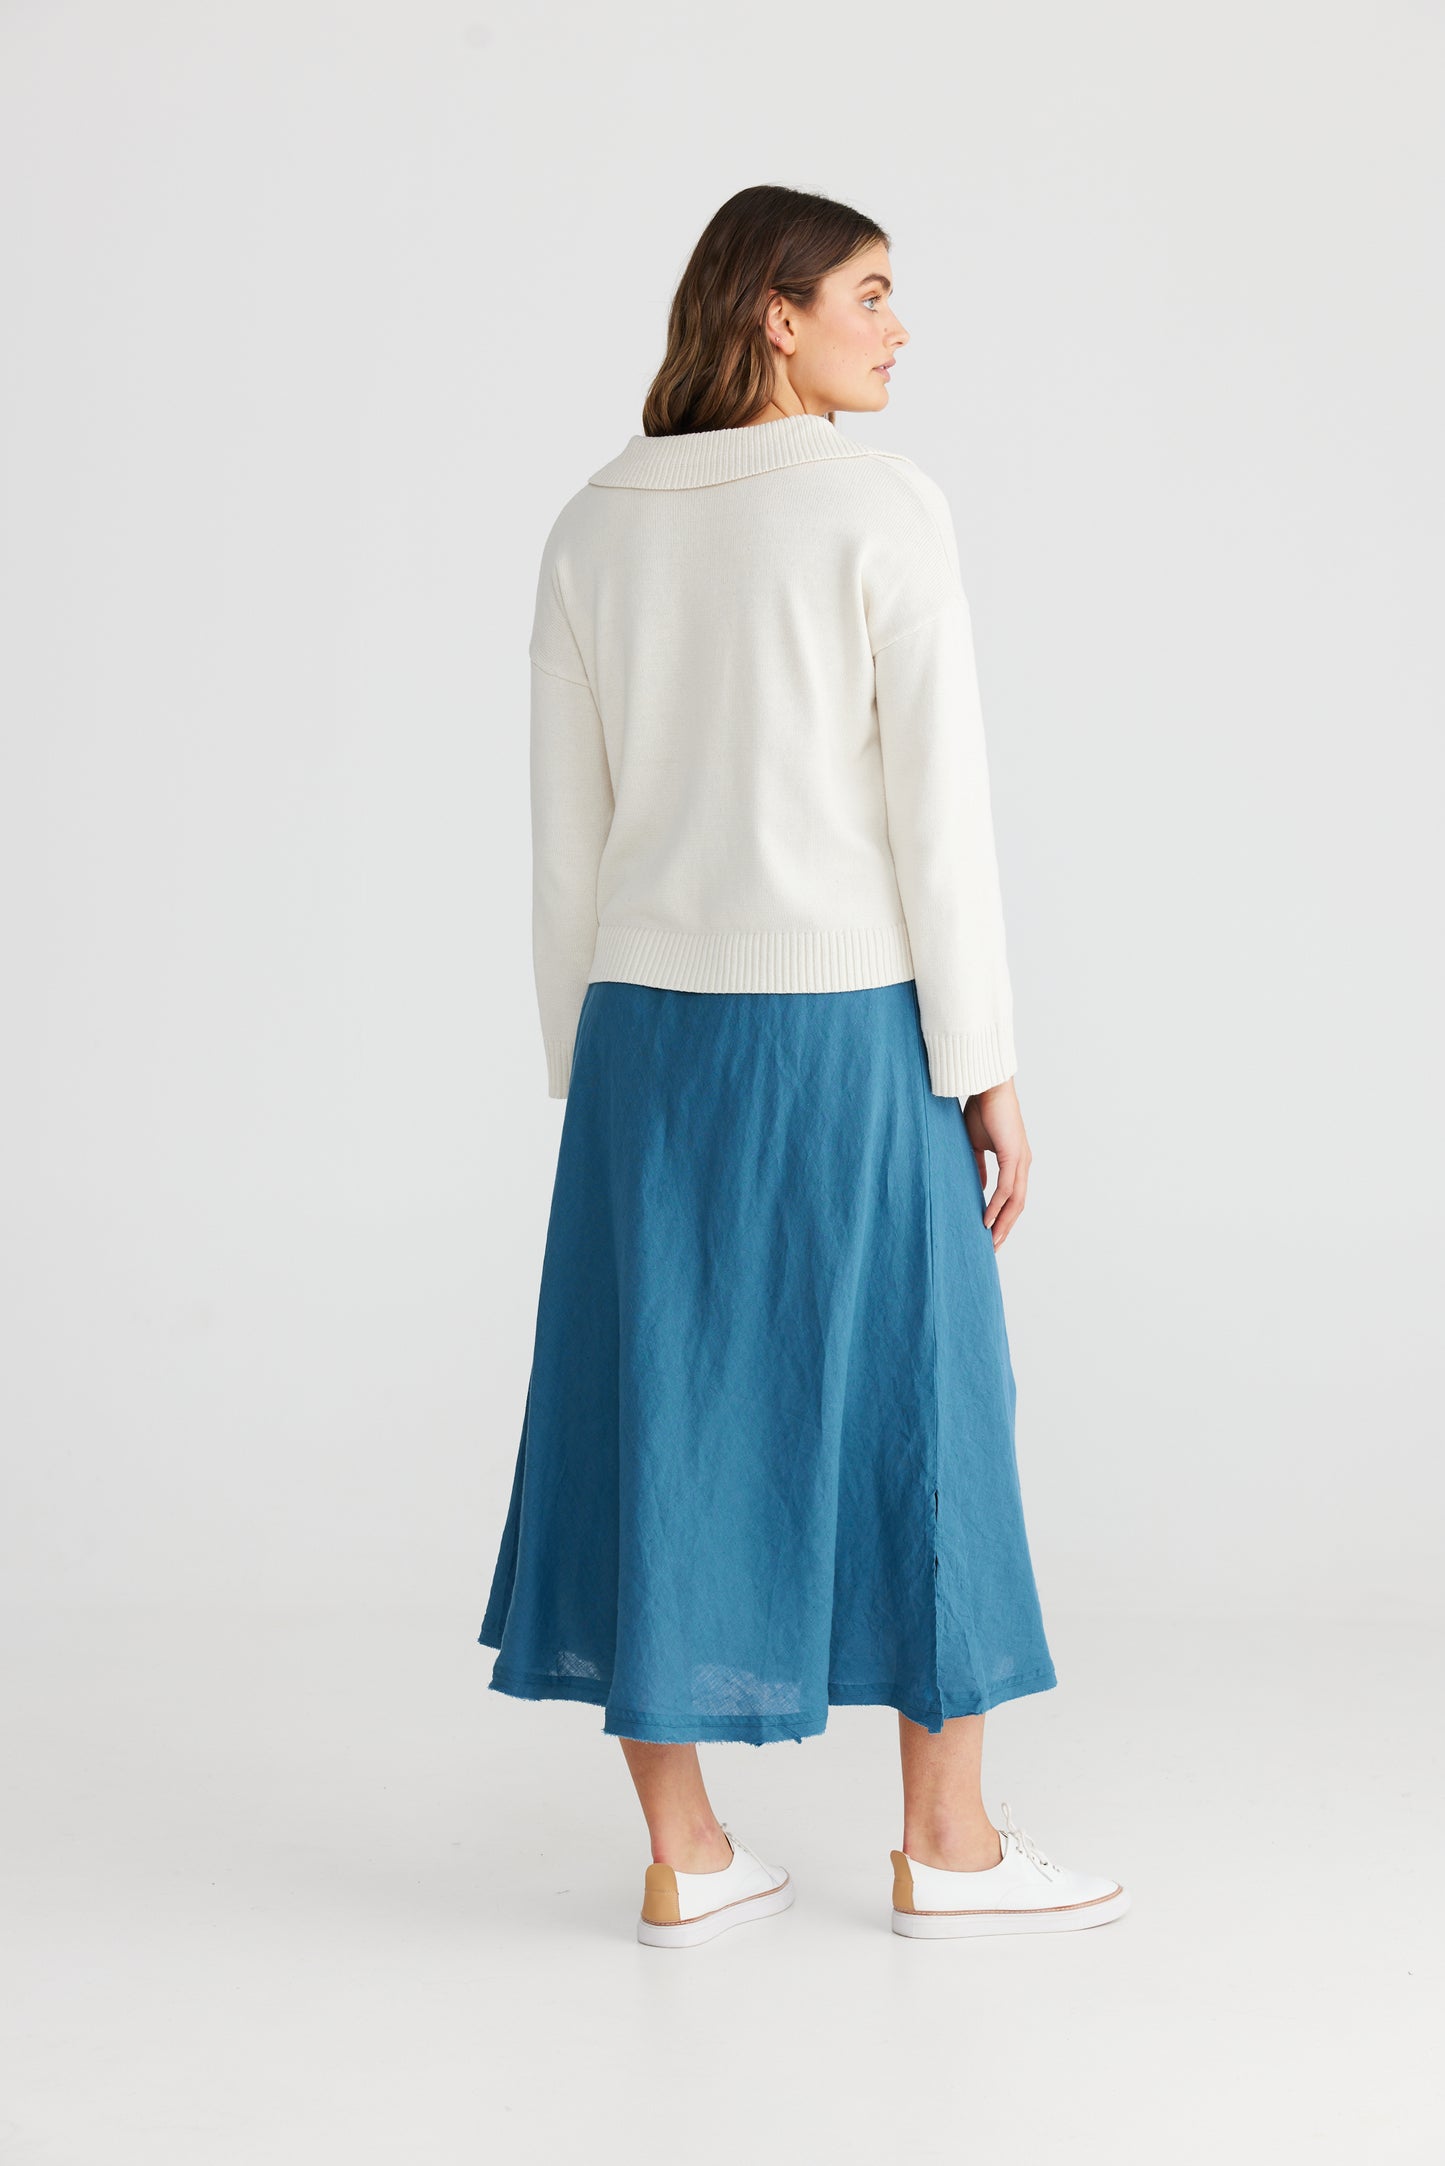 Sicily Skirt - 40% OFF AT CHECKOUT